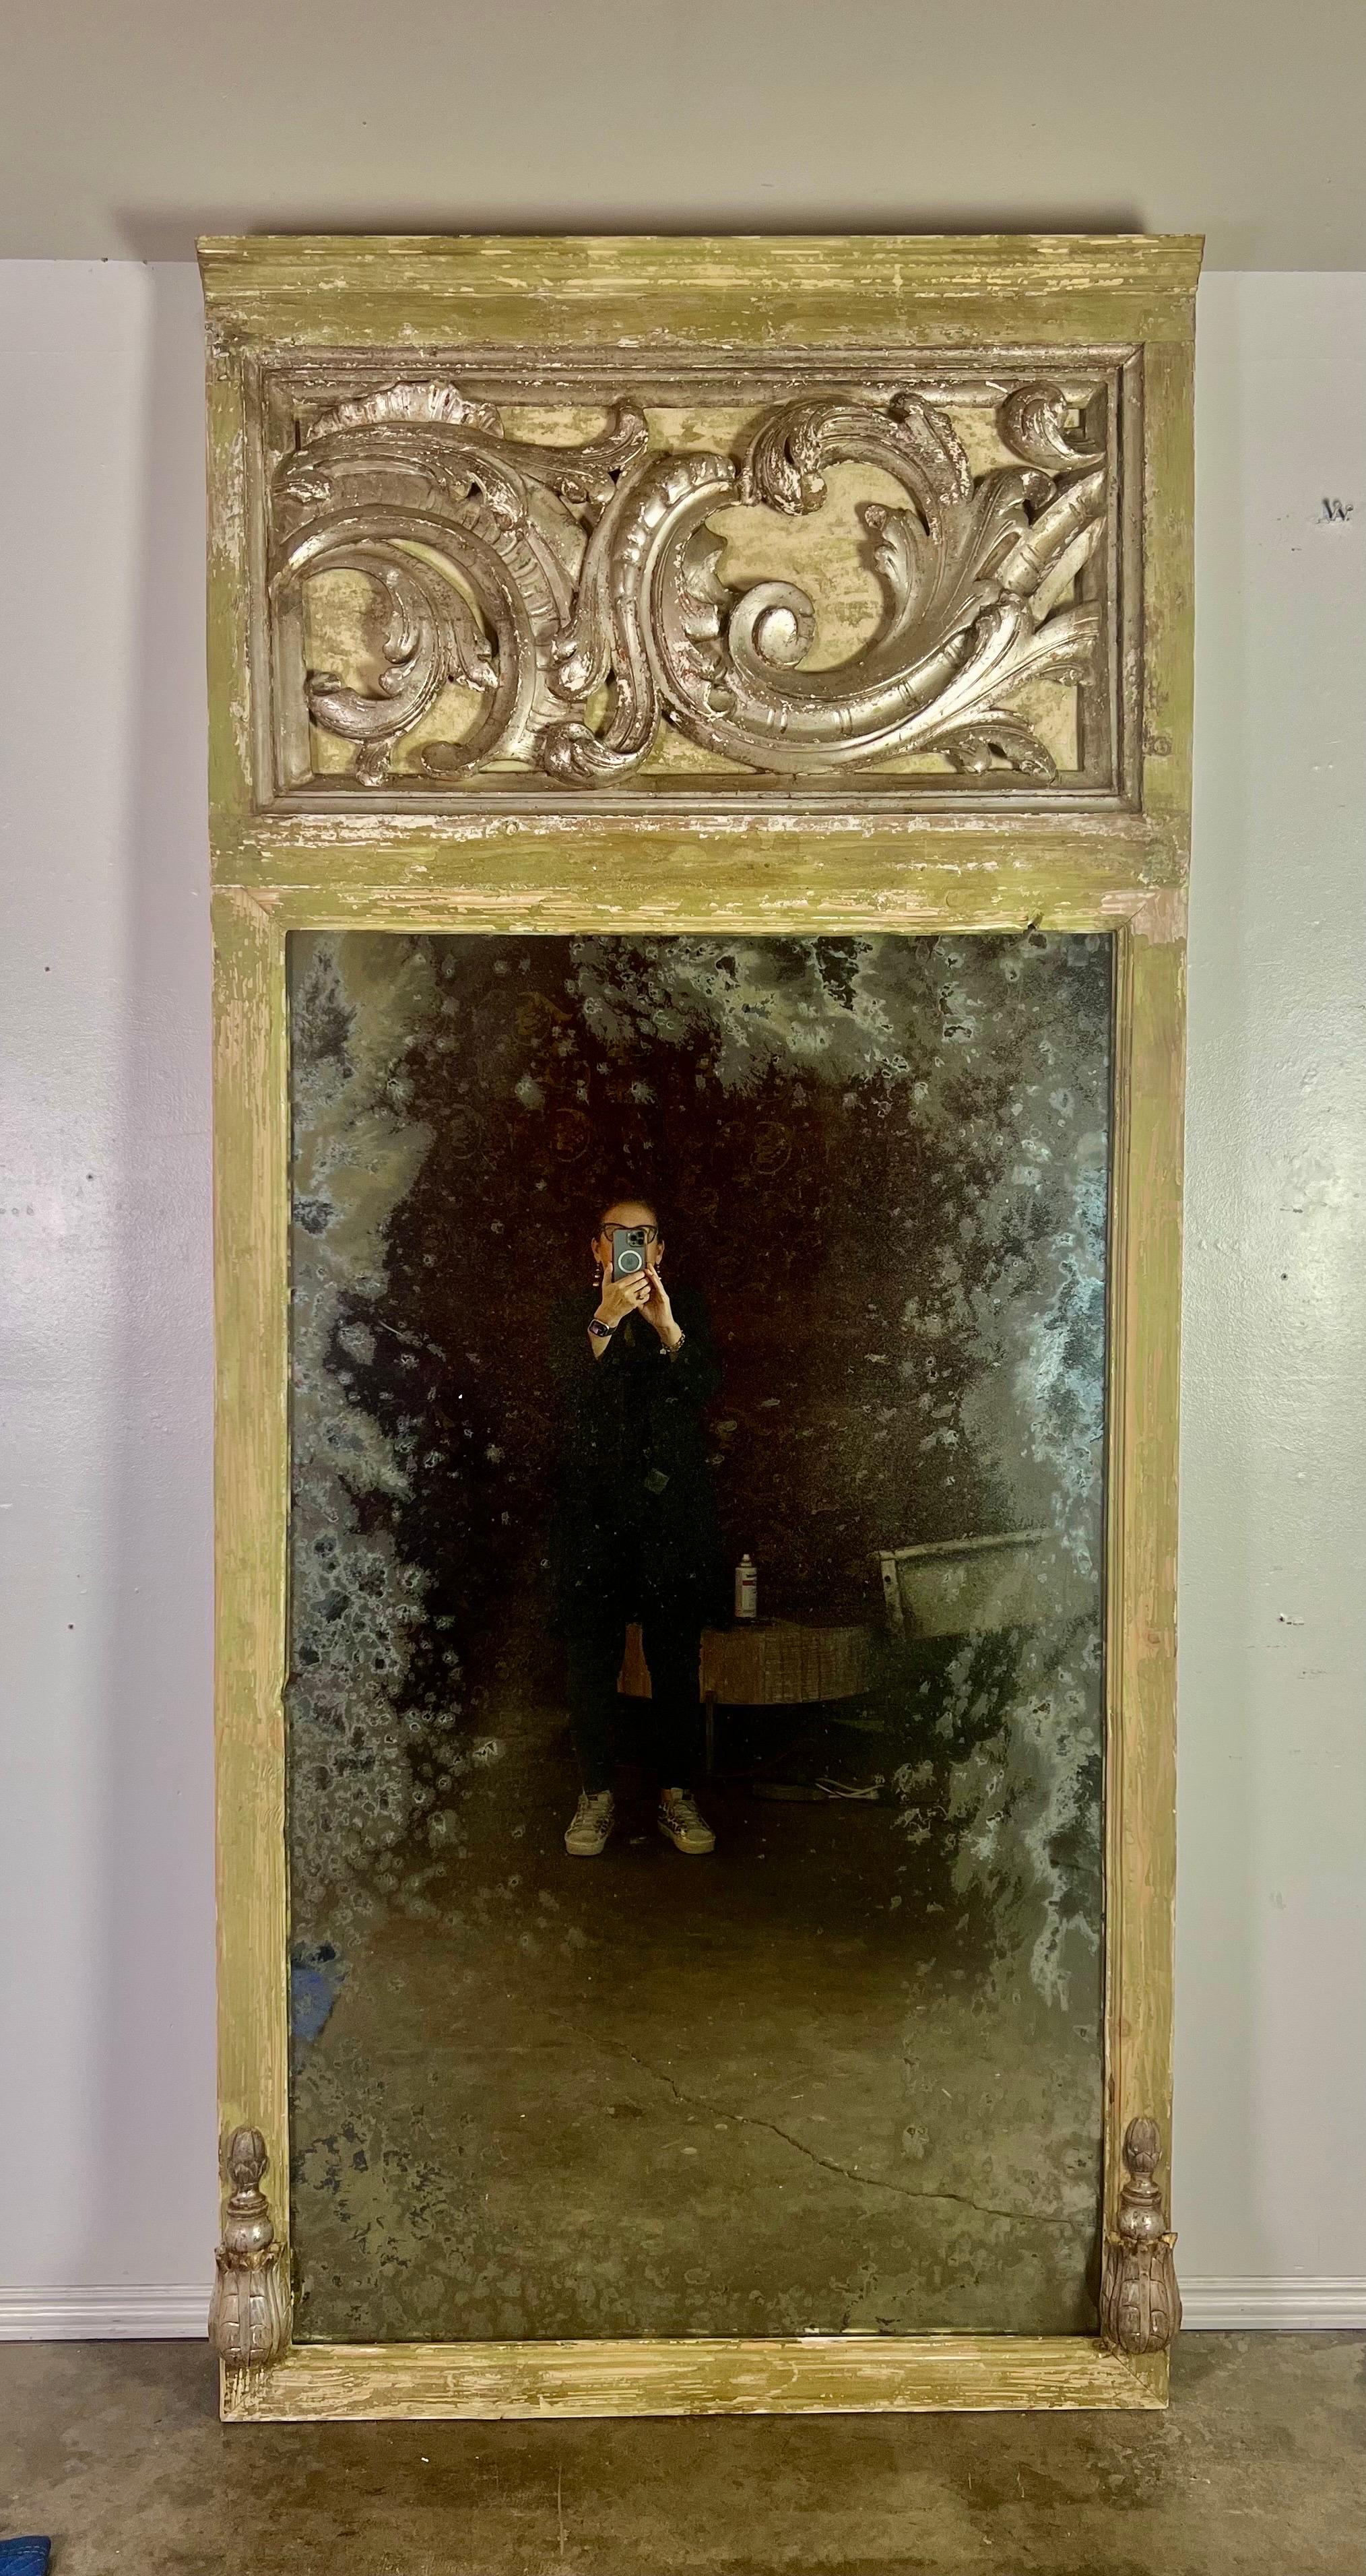 A silver gilt and painted mirror crafted from 19th--century carved wood architectural pieces, adorned with swirling scrolls and acanthus leaves, creates a visually captivating piece.  The addition of antiqued smoky mirror inset adds a touch of